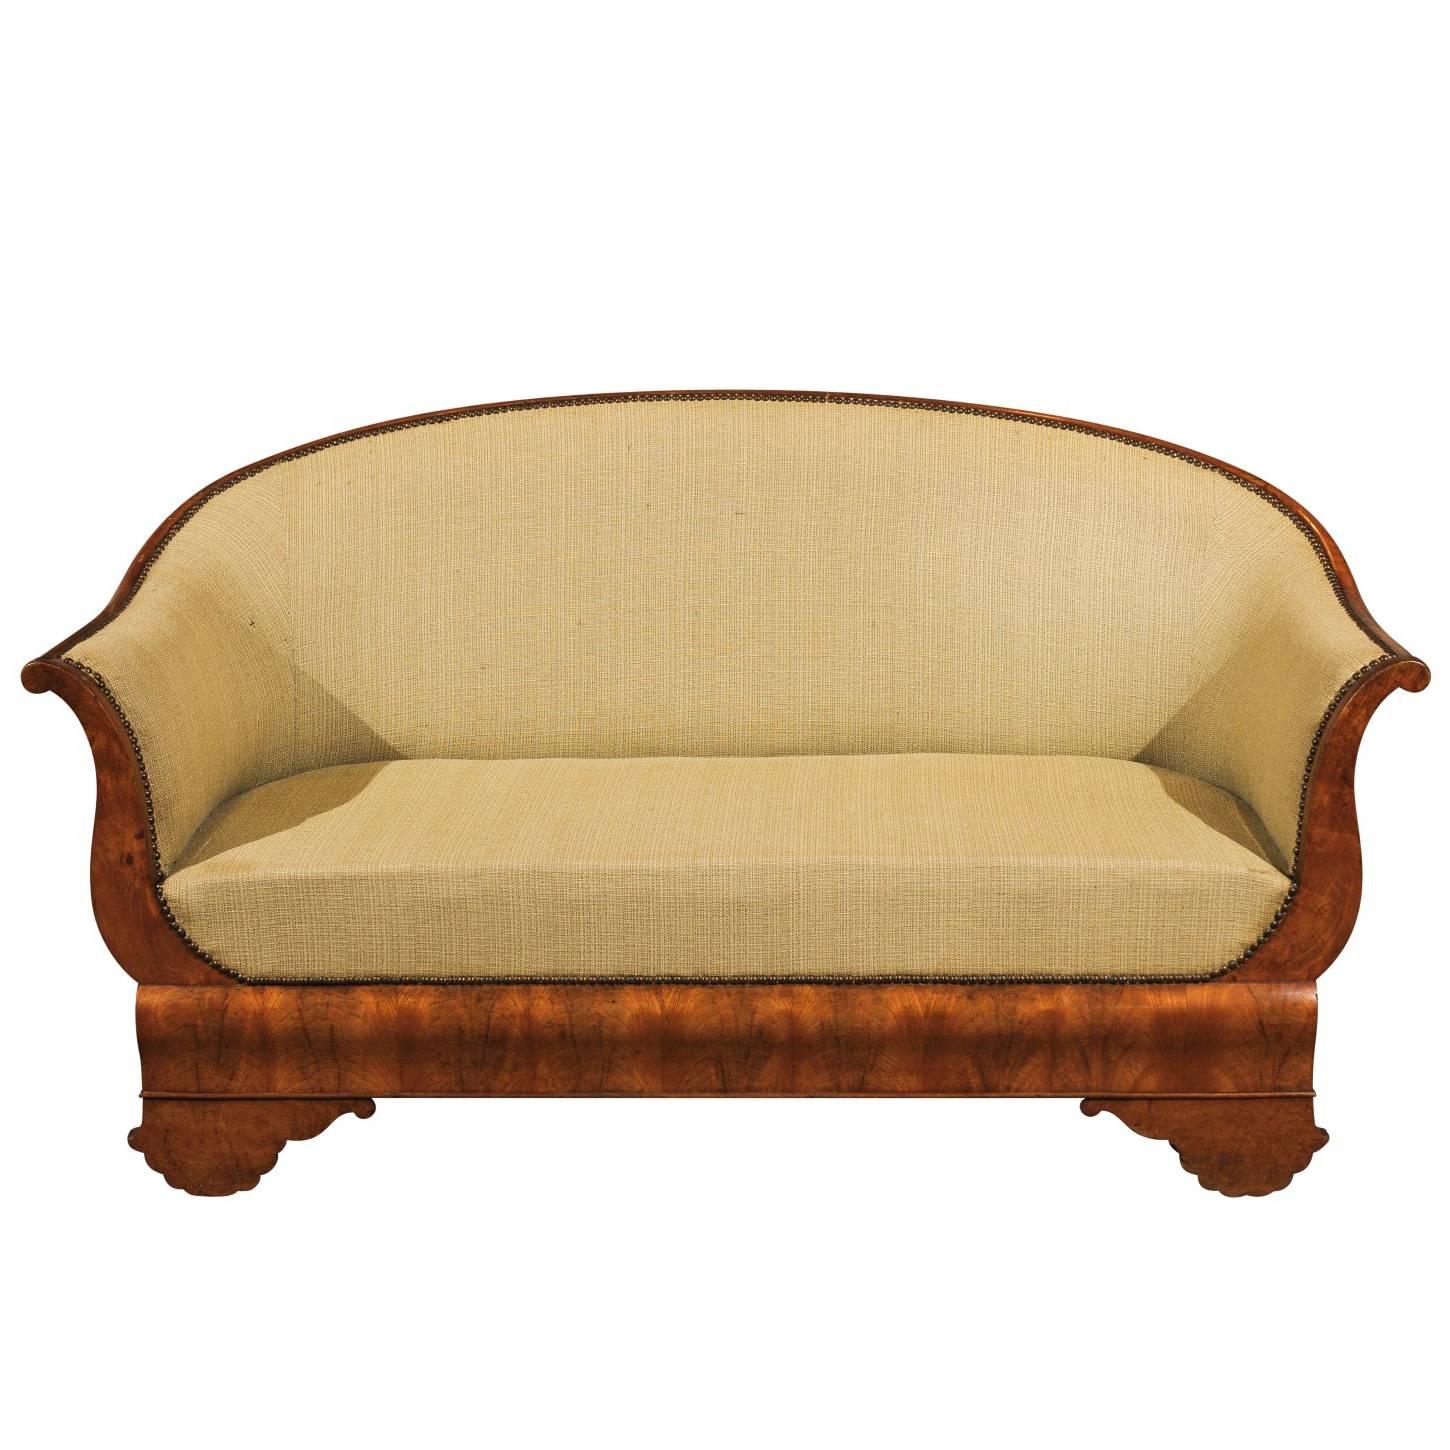 Period Louis Philippe Settee in Burled Walnut, circa 1840 For Sale